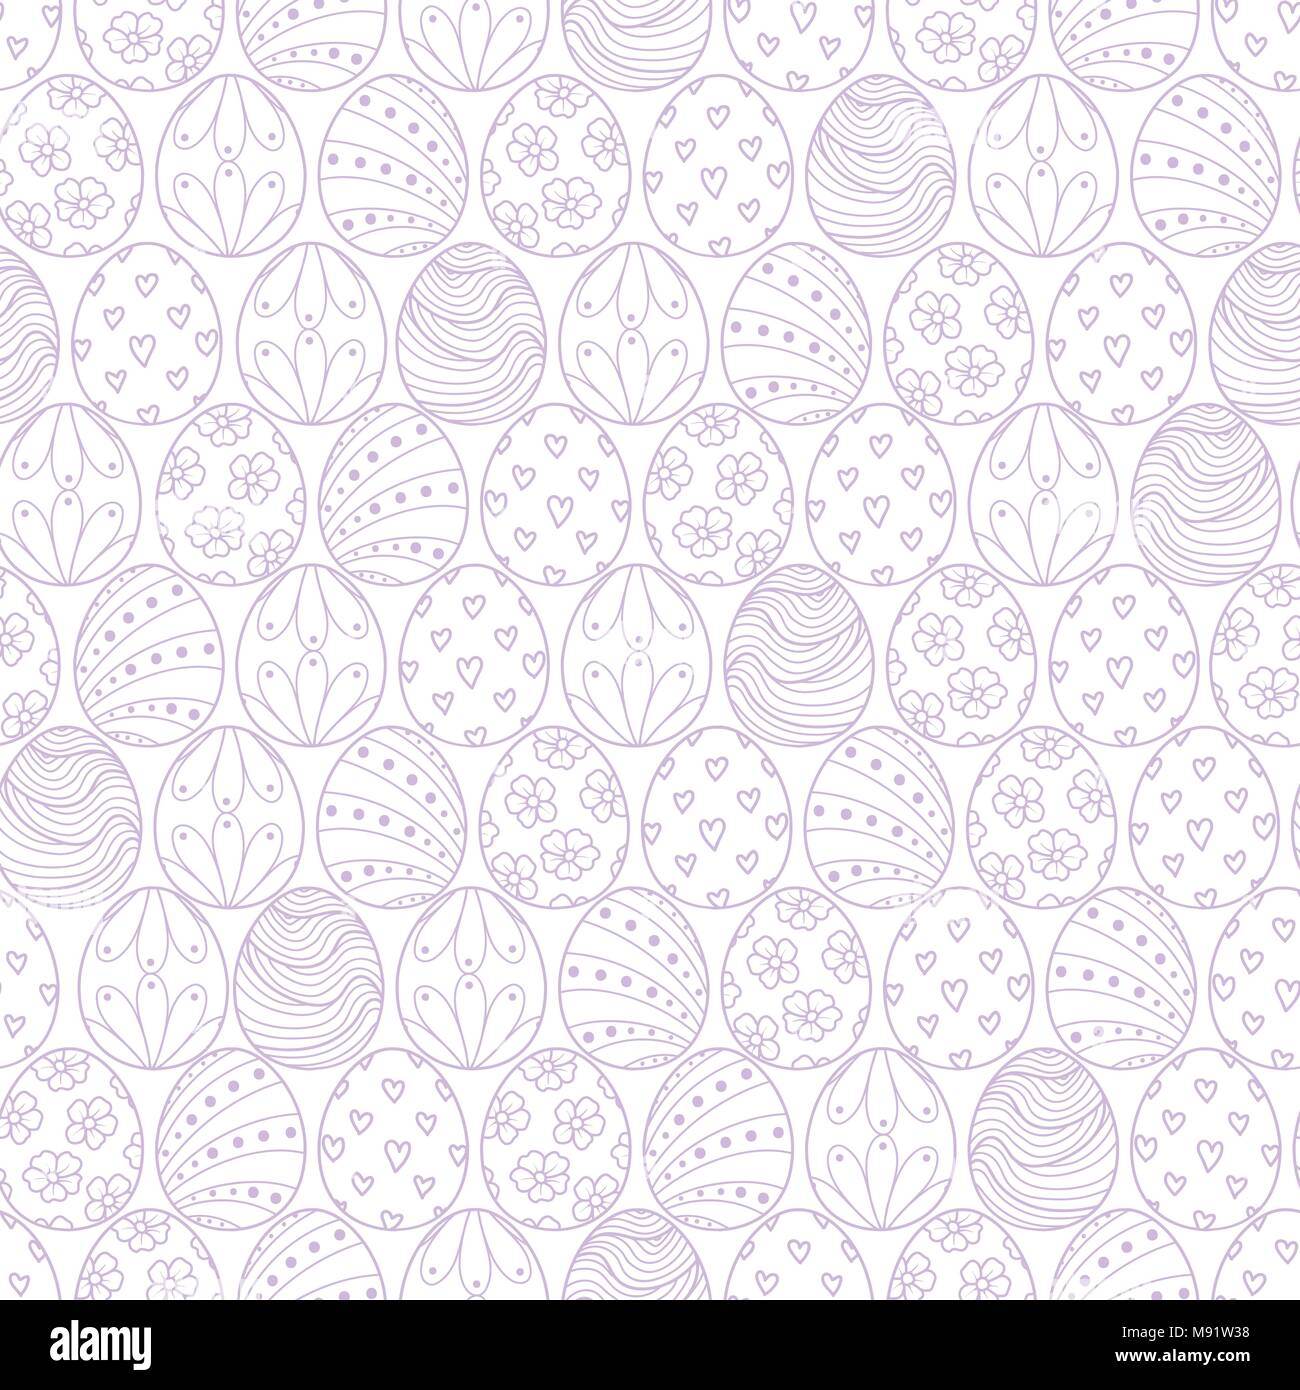 Easter eggs in pastel violet outline line up on white background. Cute hand drawn seamless pattern design for Easter festival in vector illustration. Stock Vector